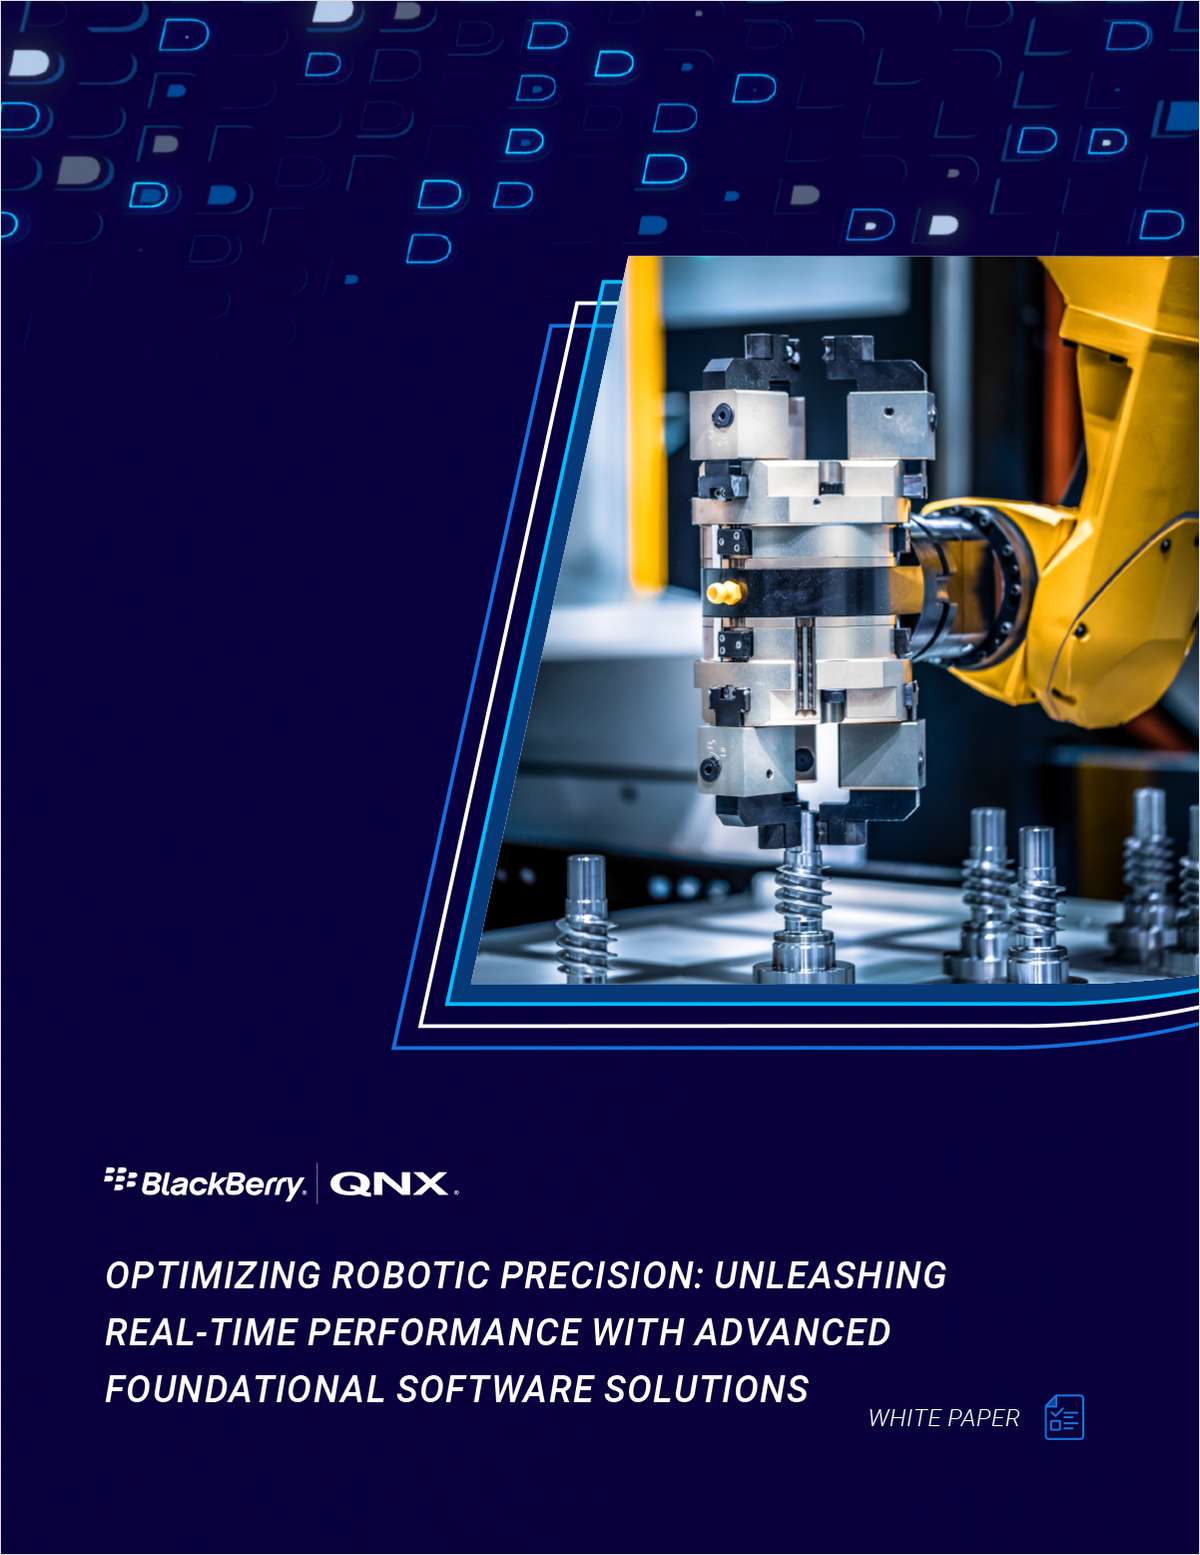 Optimizing Robotic Precision: Innovative Solutions for Unleashing Real-time Performance